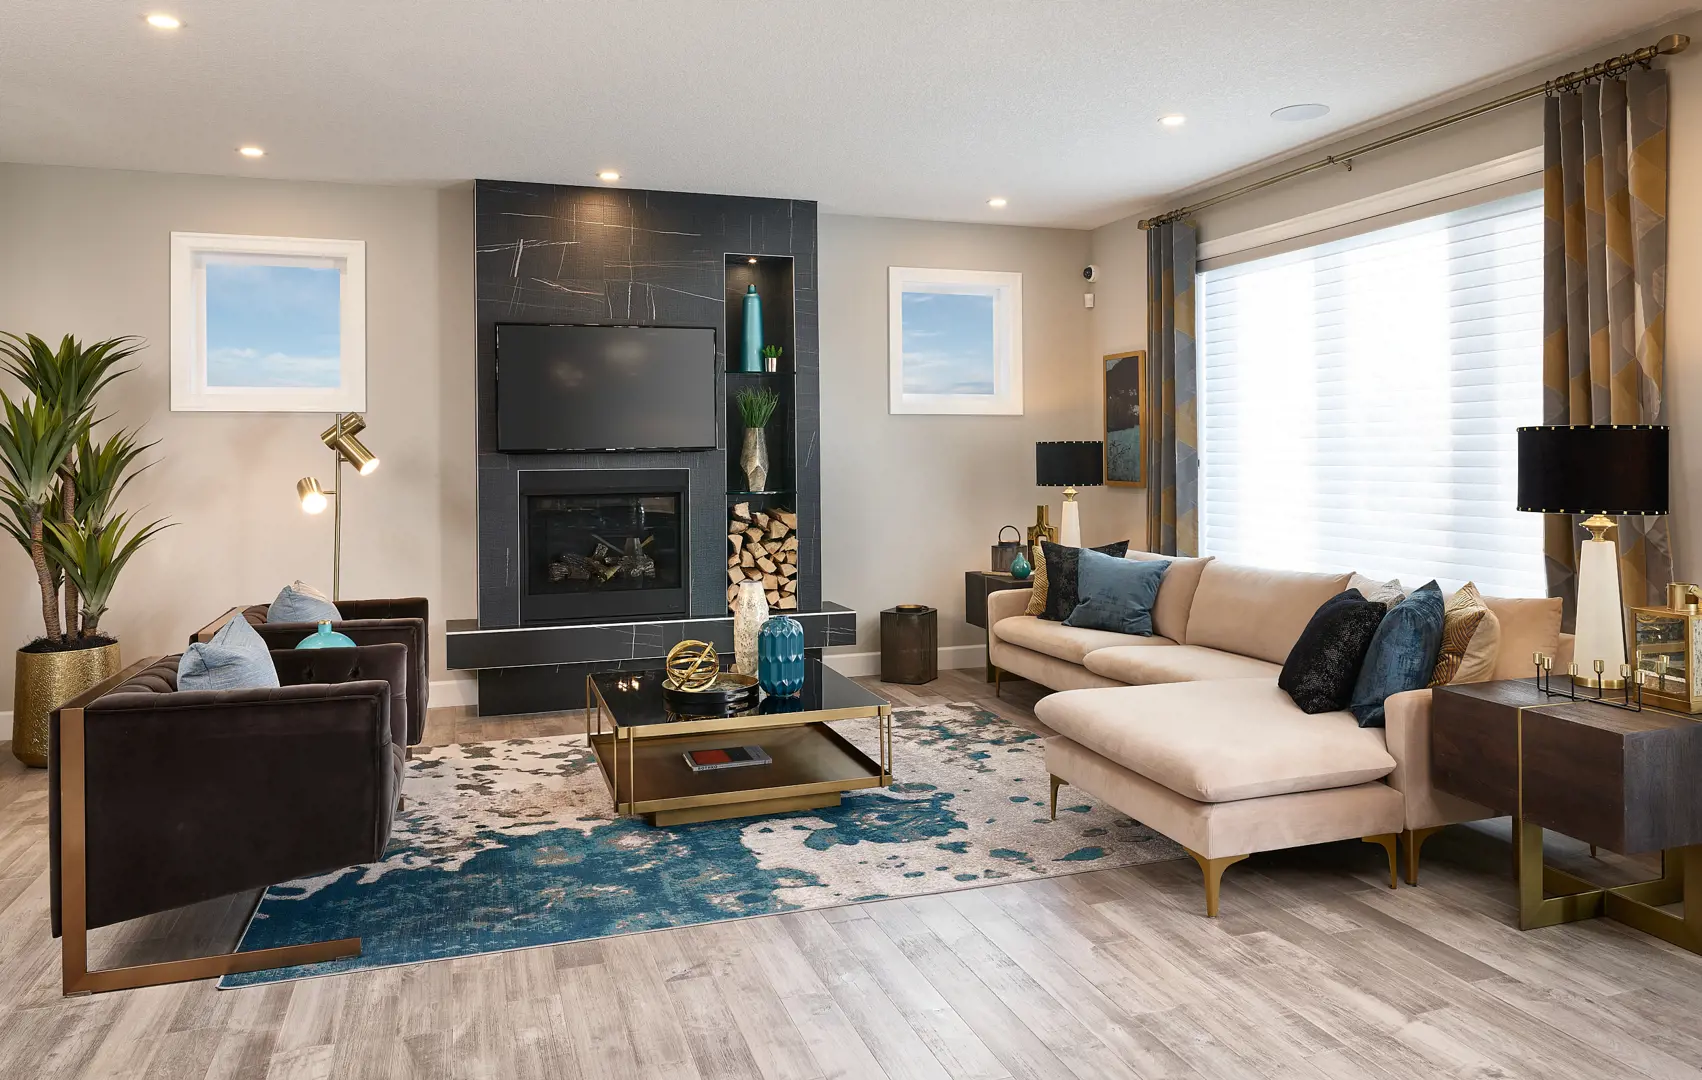 Yorkville by Mattamy Homes located at 19515 Sheriff King Street,  Calgary,   AB image 3